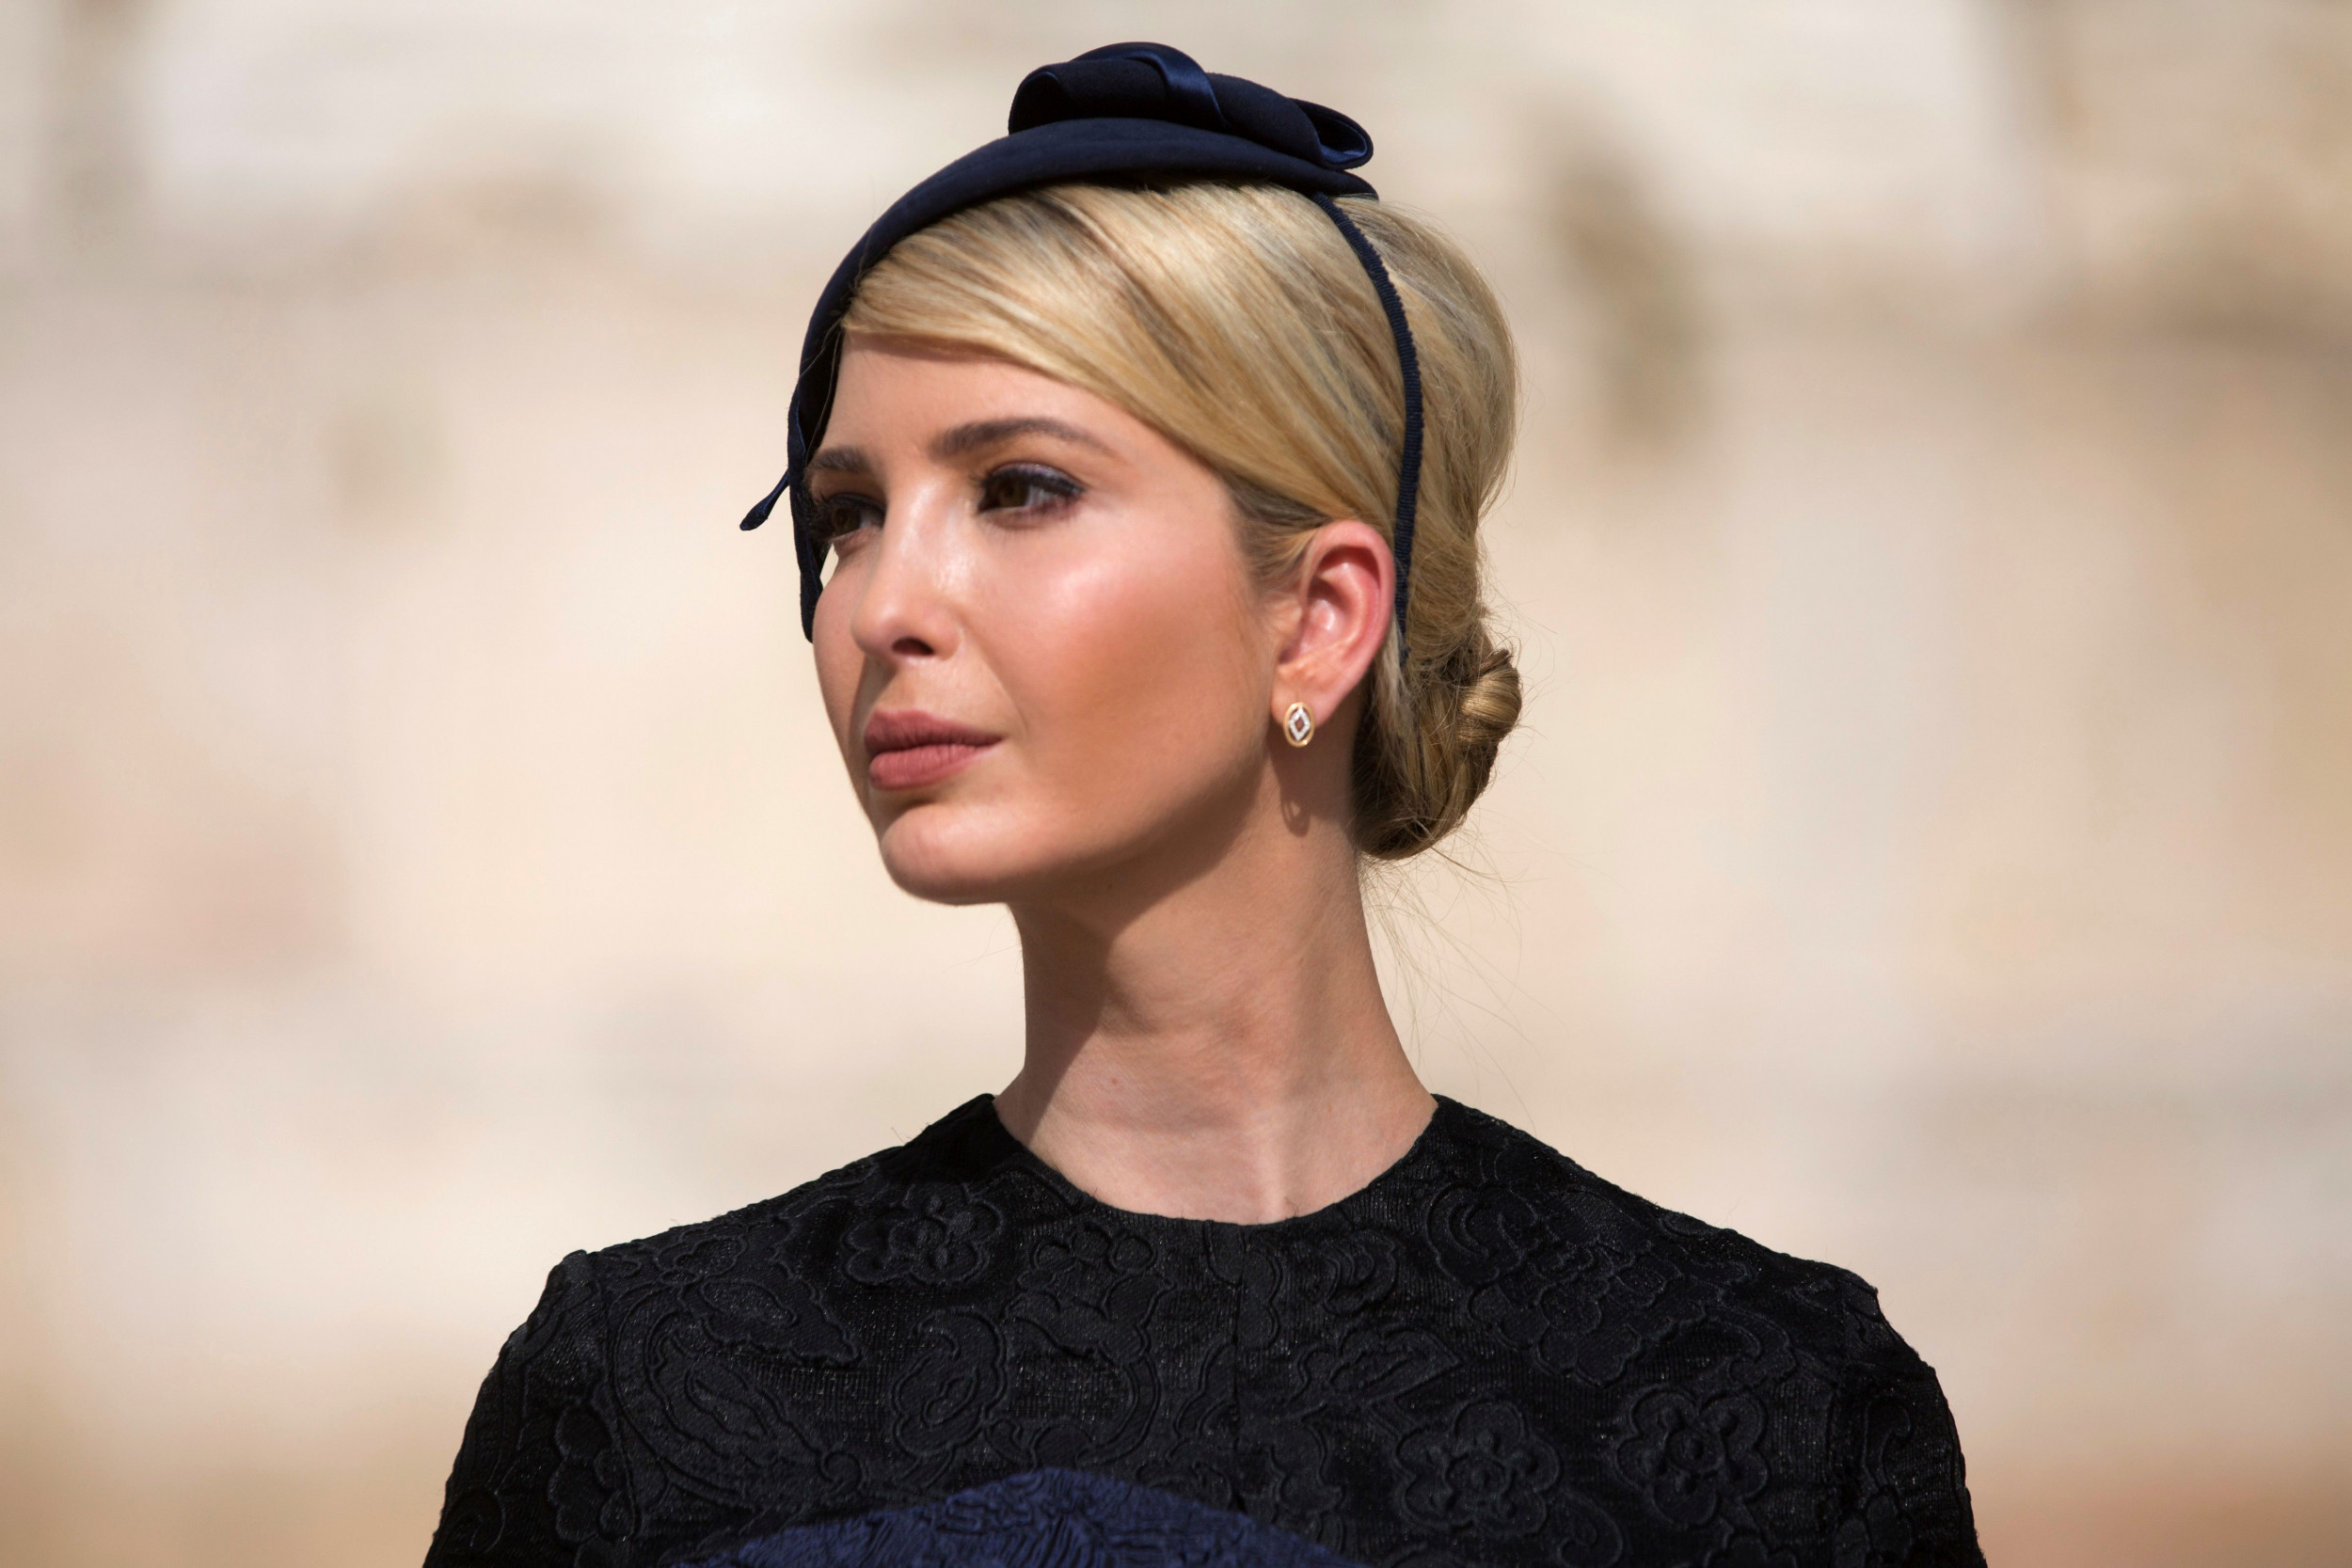 Ivanka Trump nicknamed a savior, Jewish queen Esther who stopped annihilation of Jews, by Jared Kushner’s synagogue